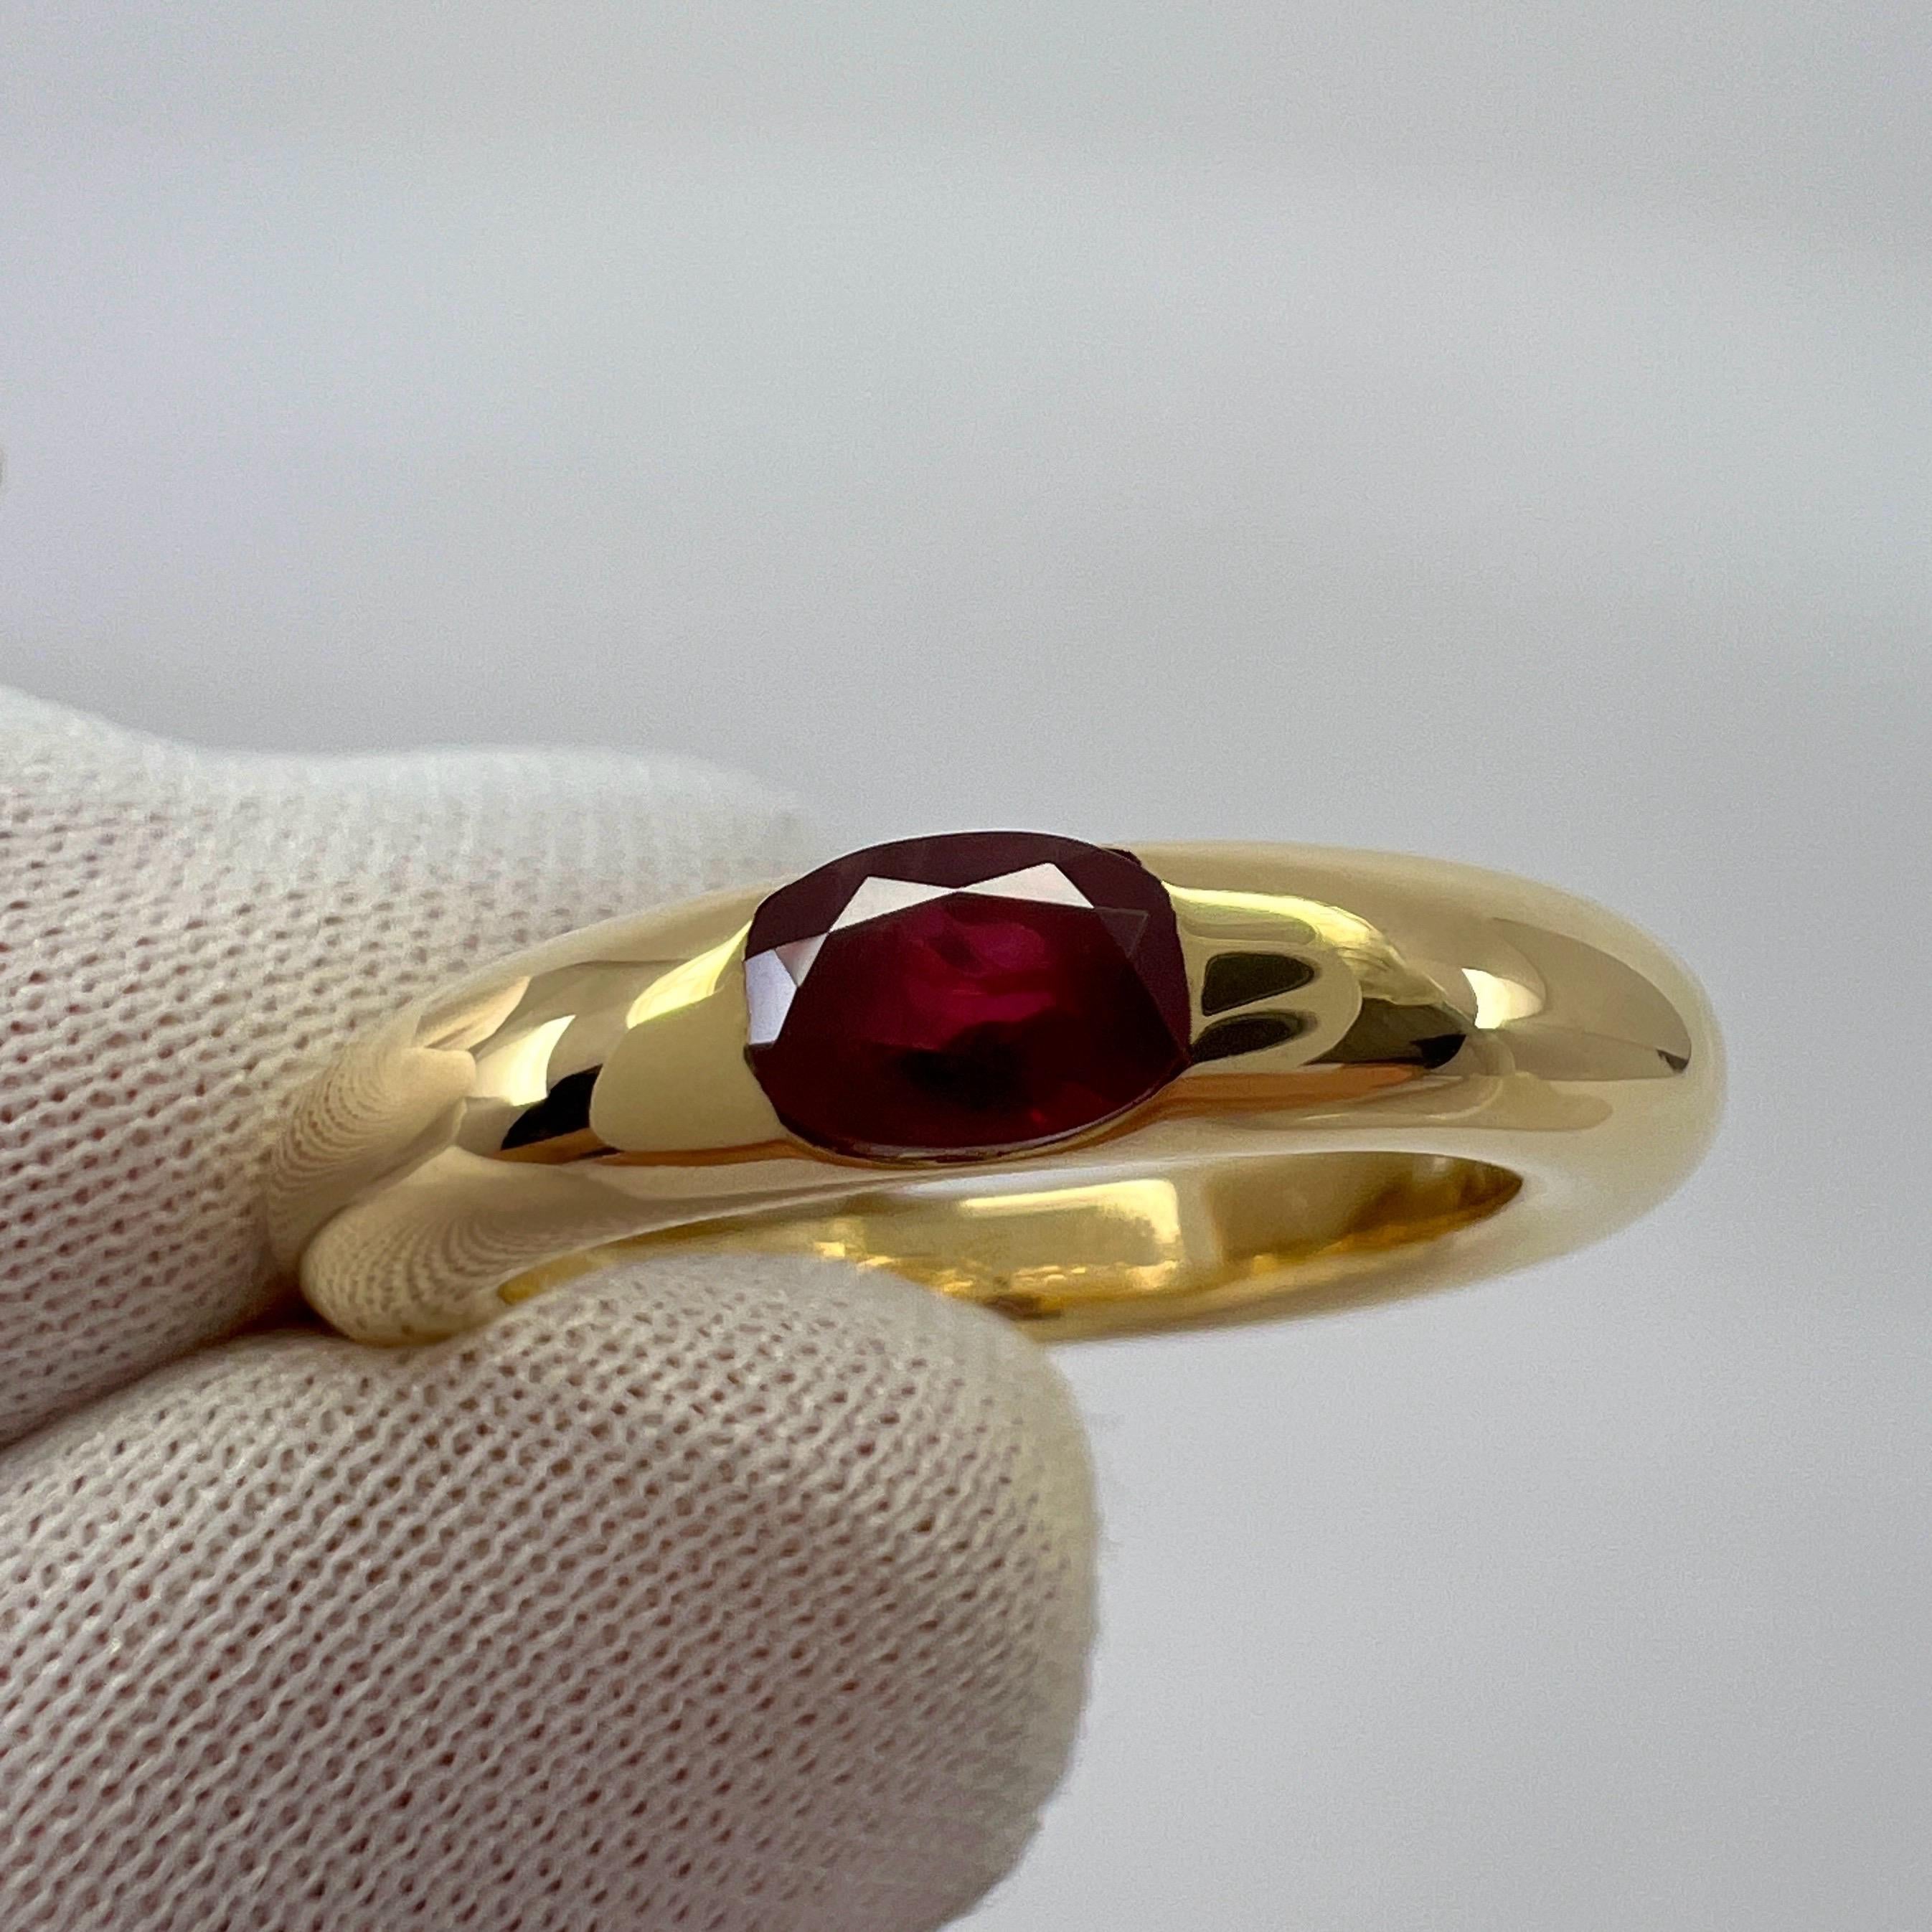 Vintage Cartier Deep Red Ruby Ellipse 18k Yellow Gold Oval Solitaire Ring 52 US6 1